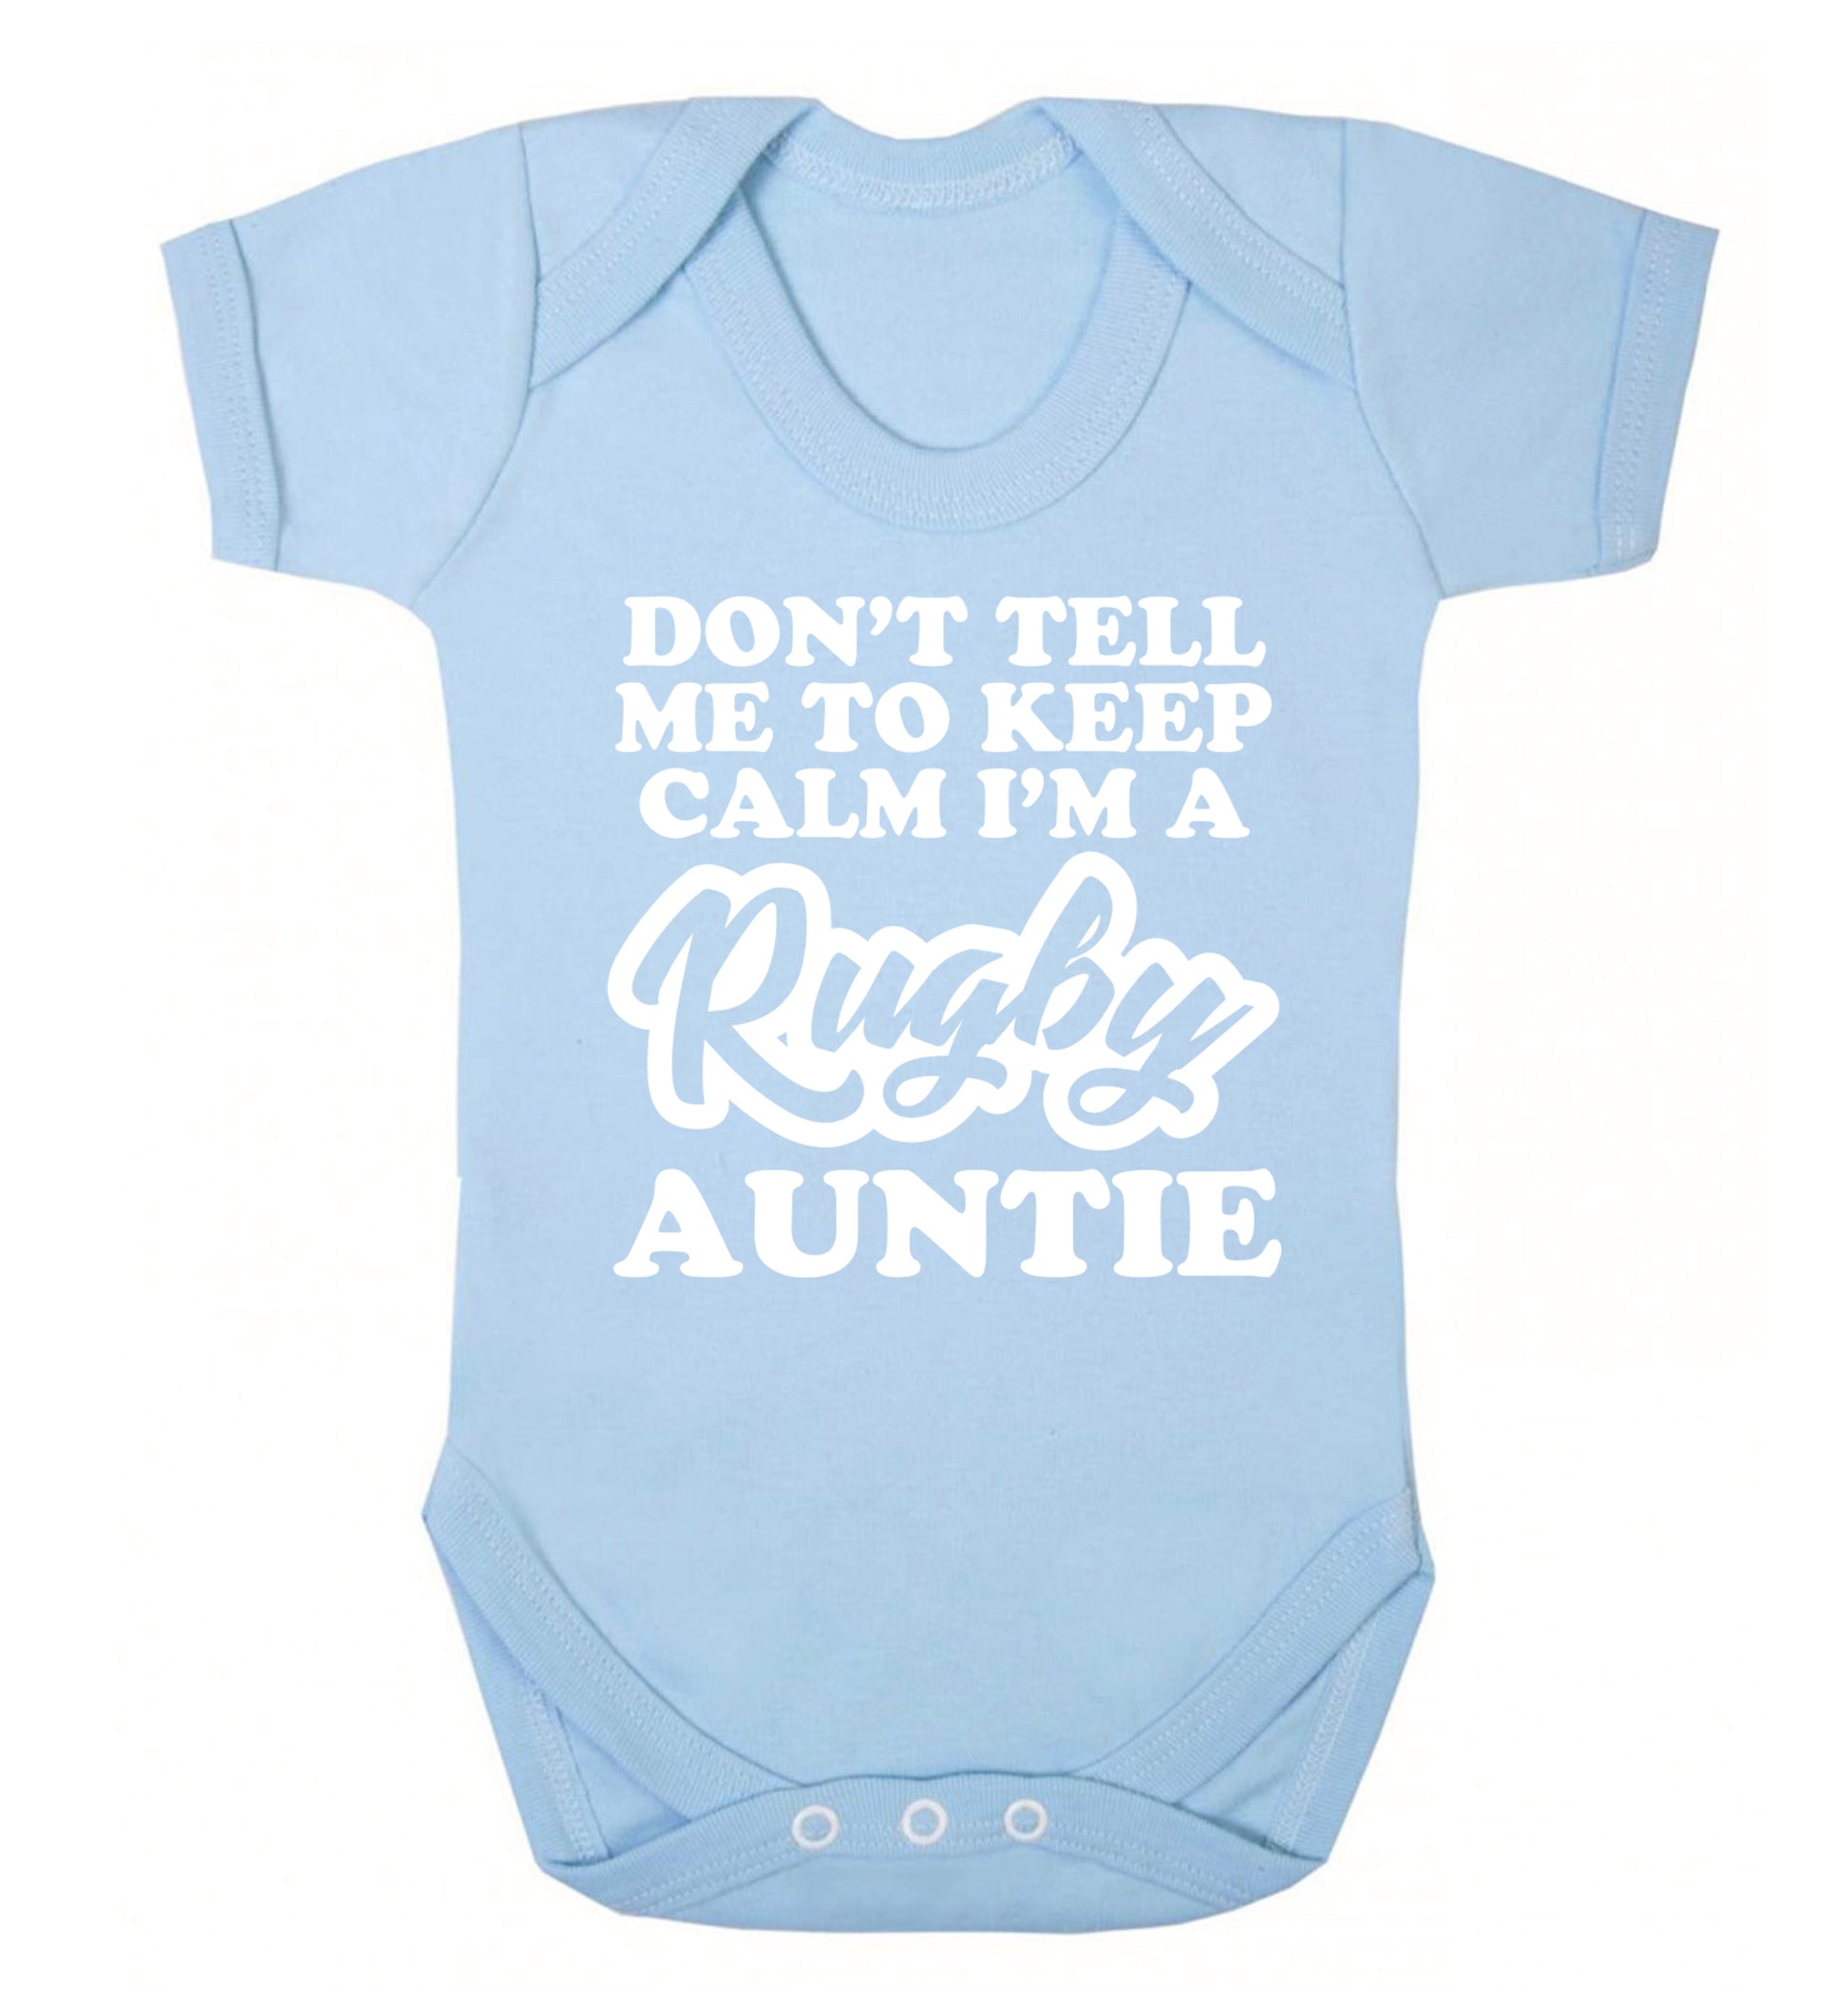 Don't tell me keep calm I'm a rugby auntie Baby Vest pale blue 18-24 months